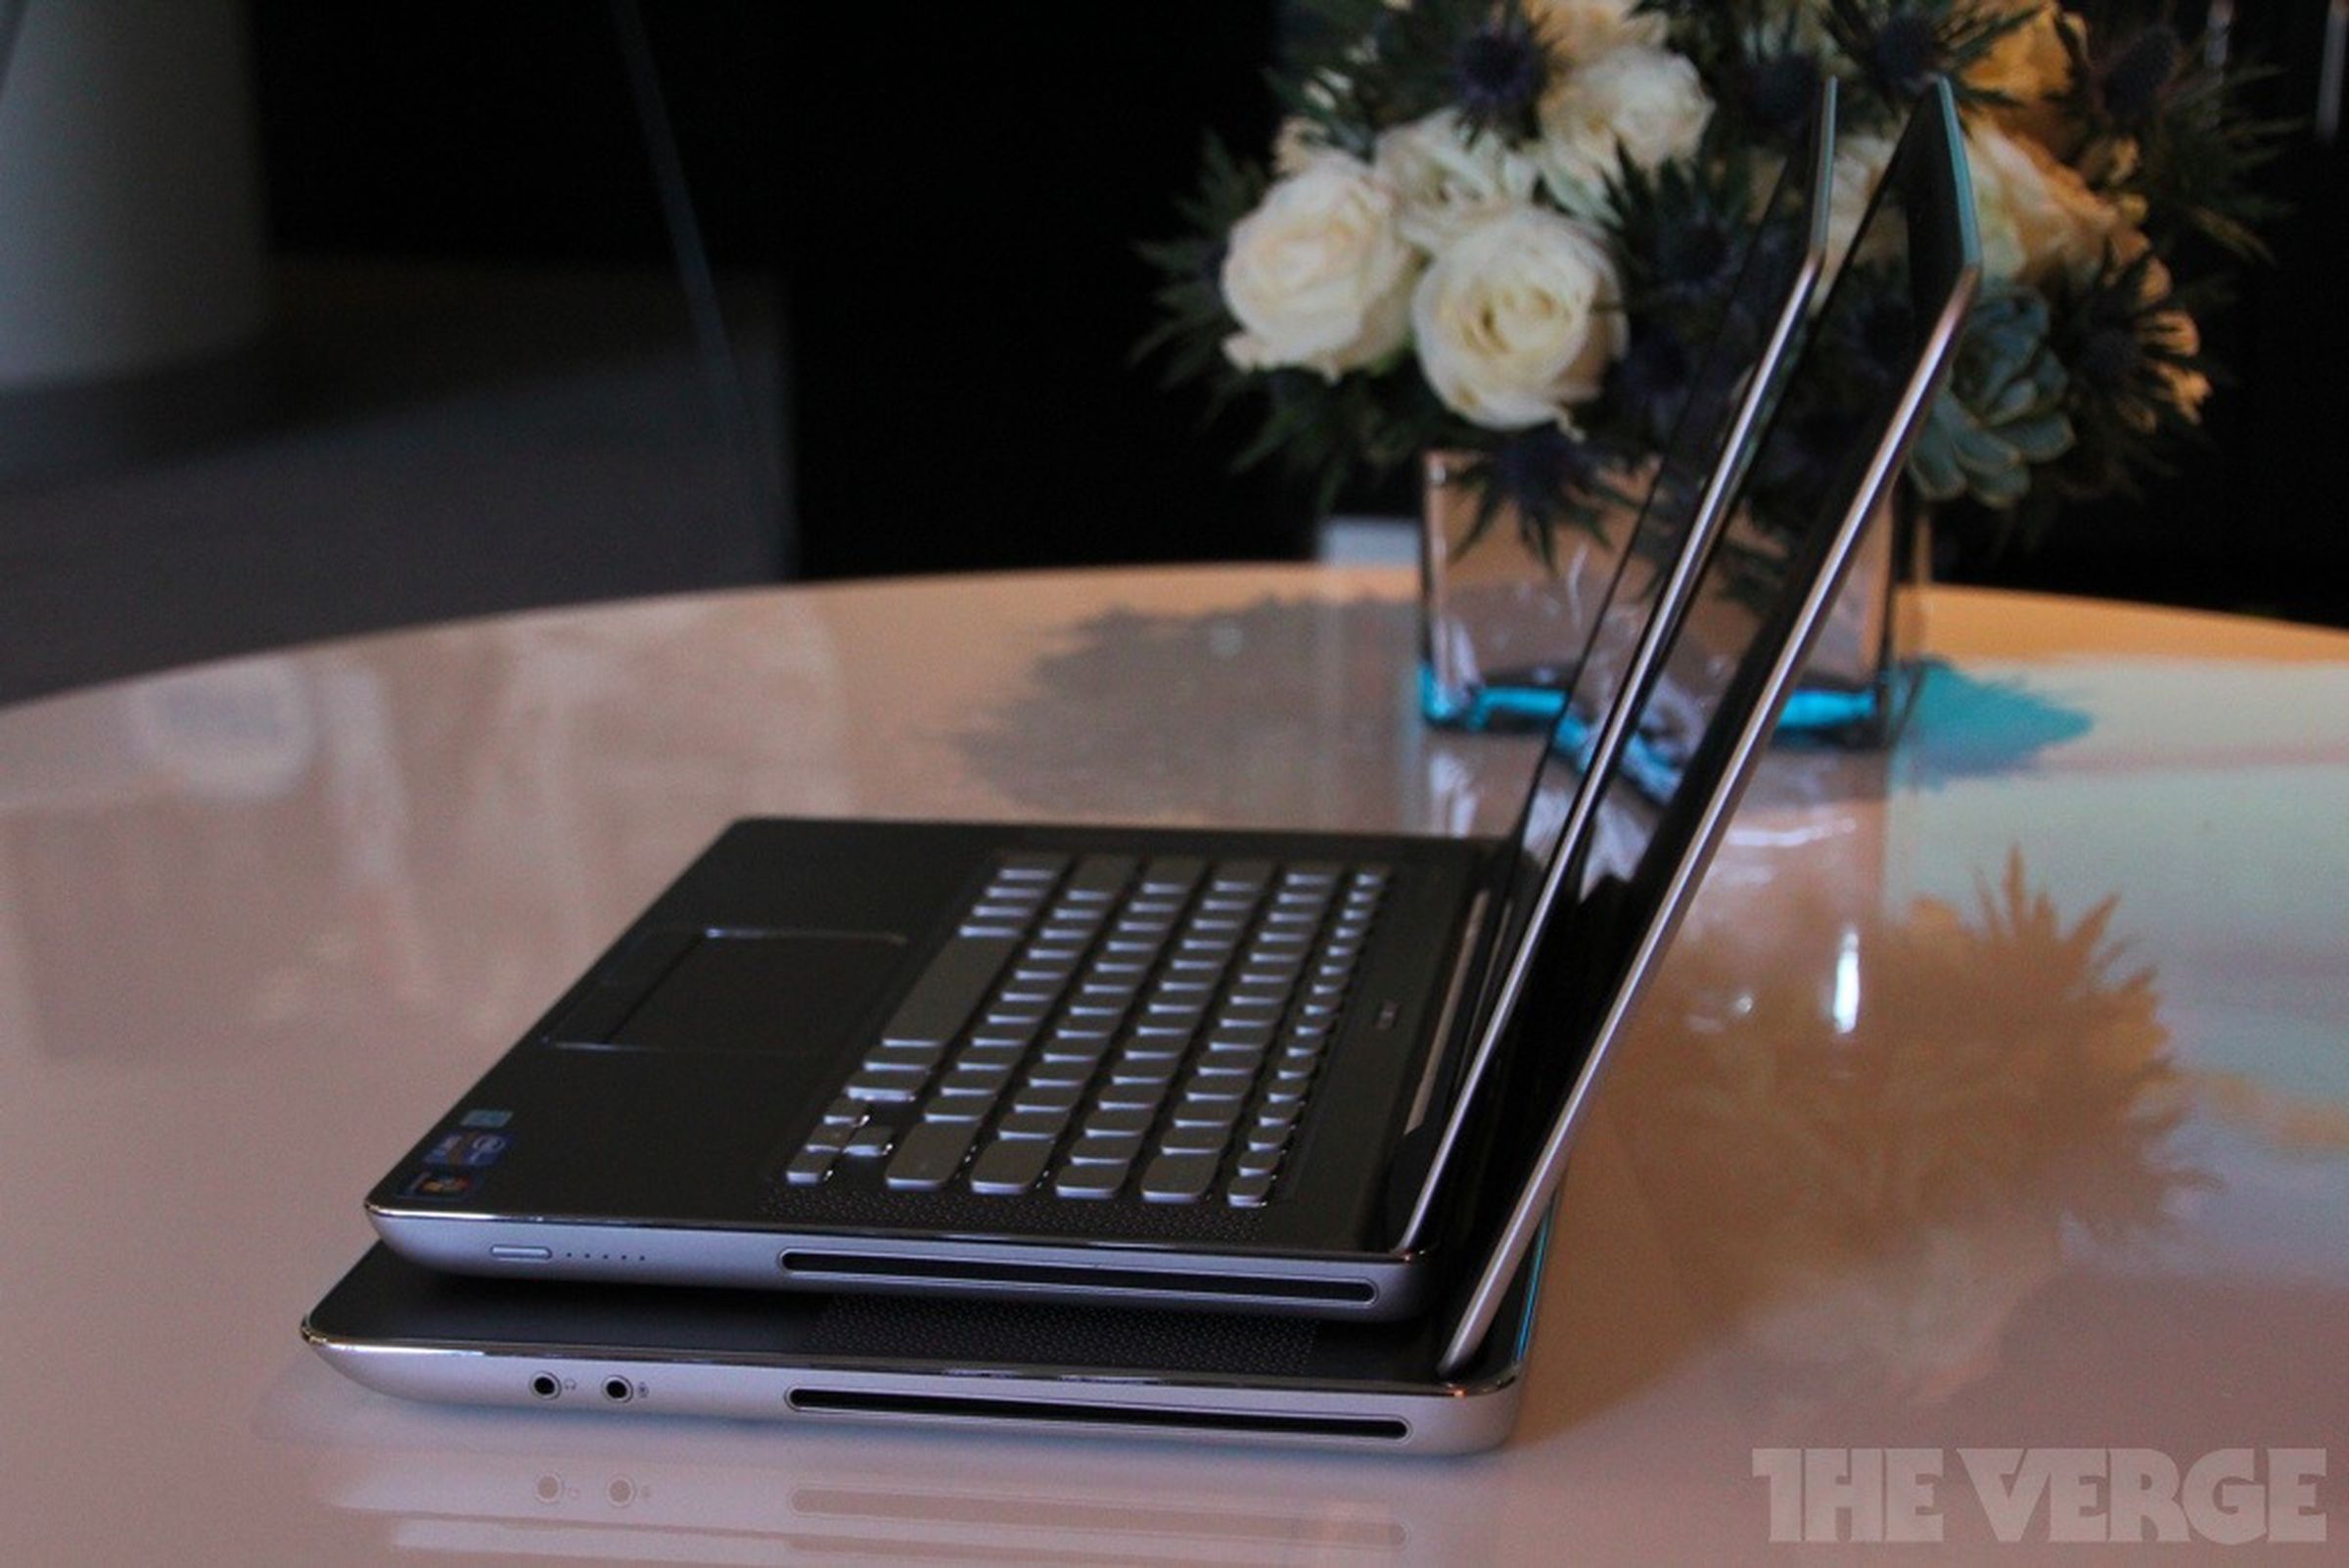 Dell XPS 14z hands-on and press pictures